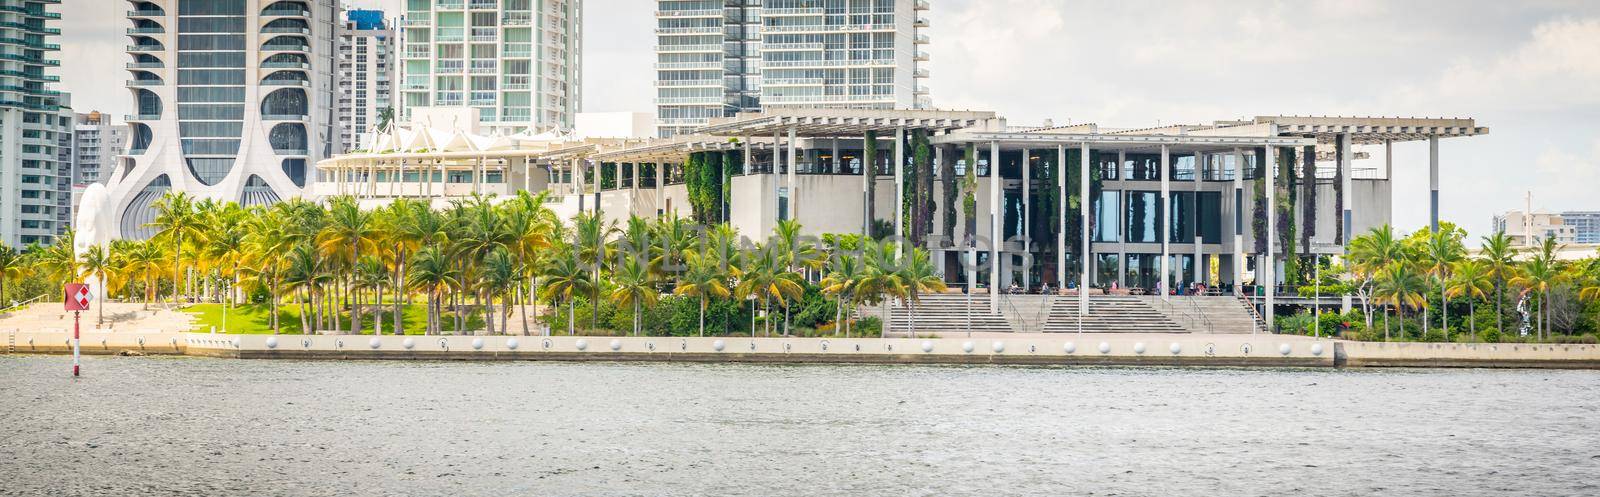 Miami USA September 11, 2019 : view of PAMM Perez Art Museum with green exterior decoration and flying garden. Modern and contemporary art museum opened in 2013 in Museum Park in downtown Miami by Mariakray